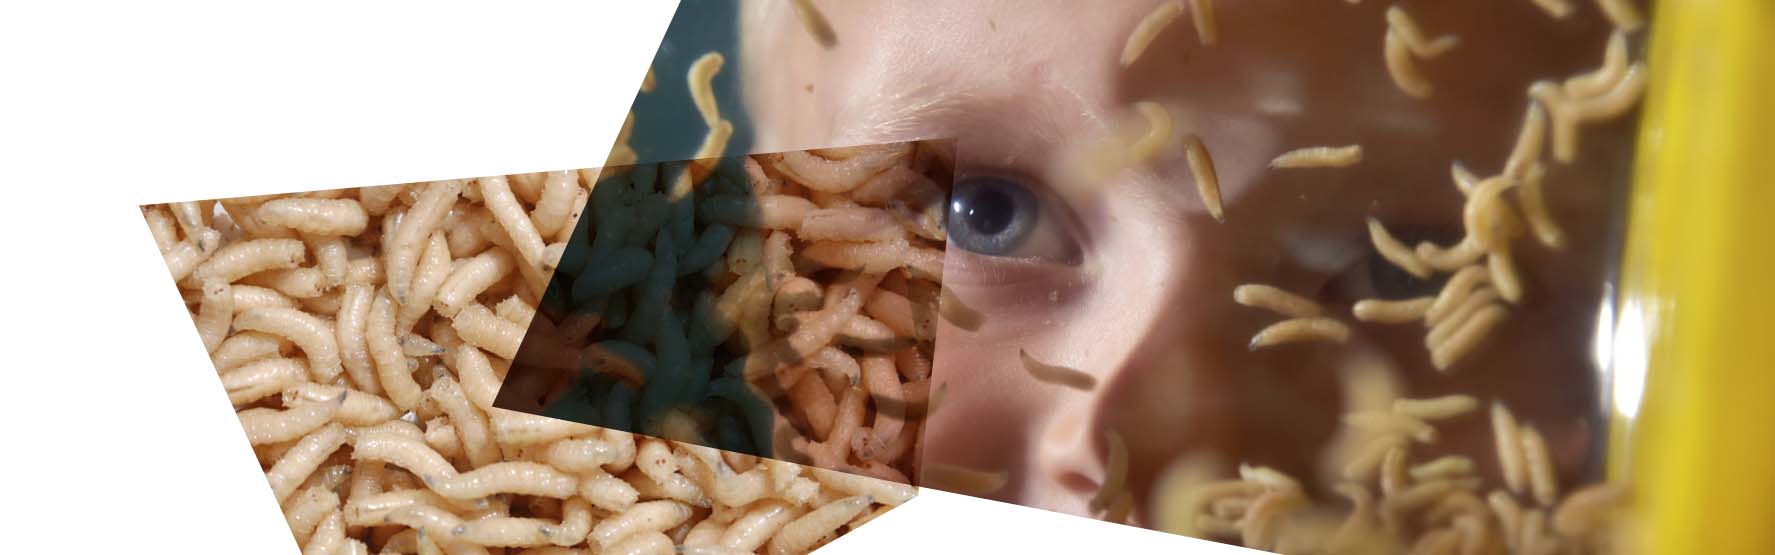 Maggots in front of a child's face